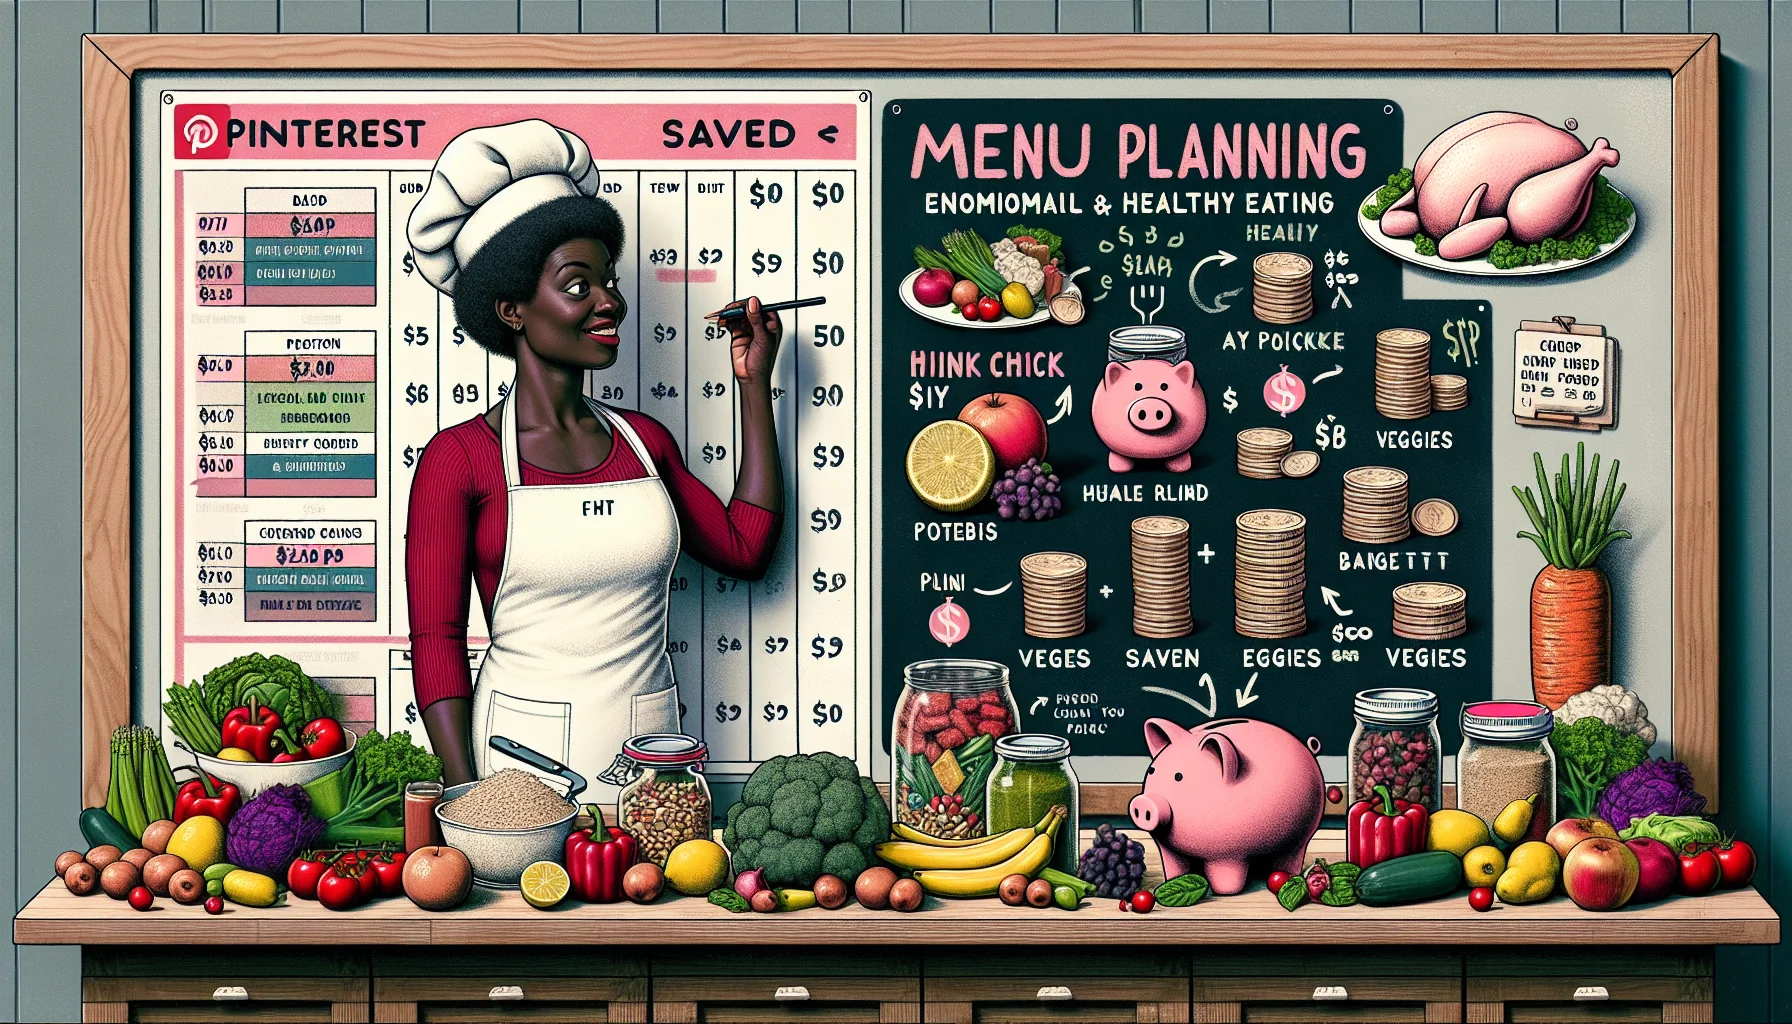 Generate an engaging and humorous image demonstrating a Pinterest-inspired menu planning scenario. Emphasize on economical and healthy eating. Picture a Black woman in her 30s wearing a chef's hat, standing by a counter filled with fresh fruits, vegetables, whole grains, and lean proteins. Next to her is a large chalkboard featuring a week's worth of creatively planned out meals. The funds saved are creatively visualized as stacks of coins or piggy banks. Include elements of humor - perhaps a lean chicken wearing a bargain tag or veggies performing a budget dance.